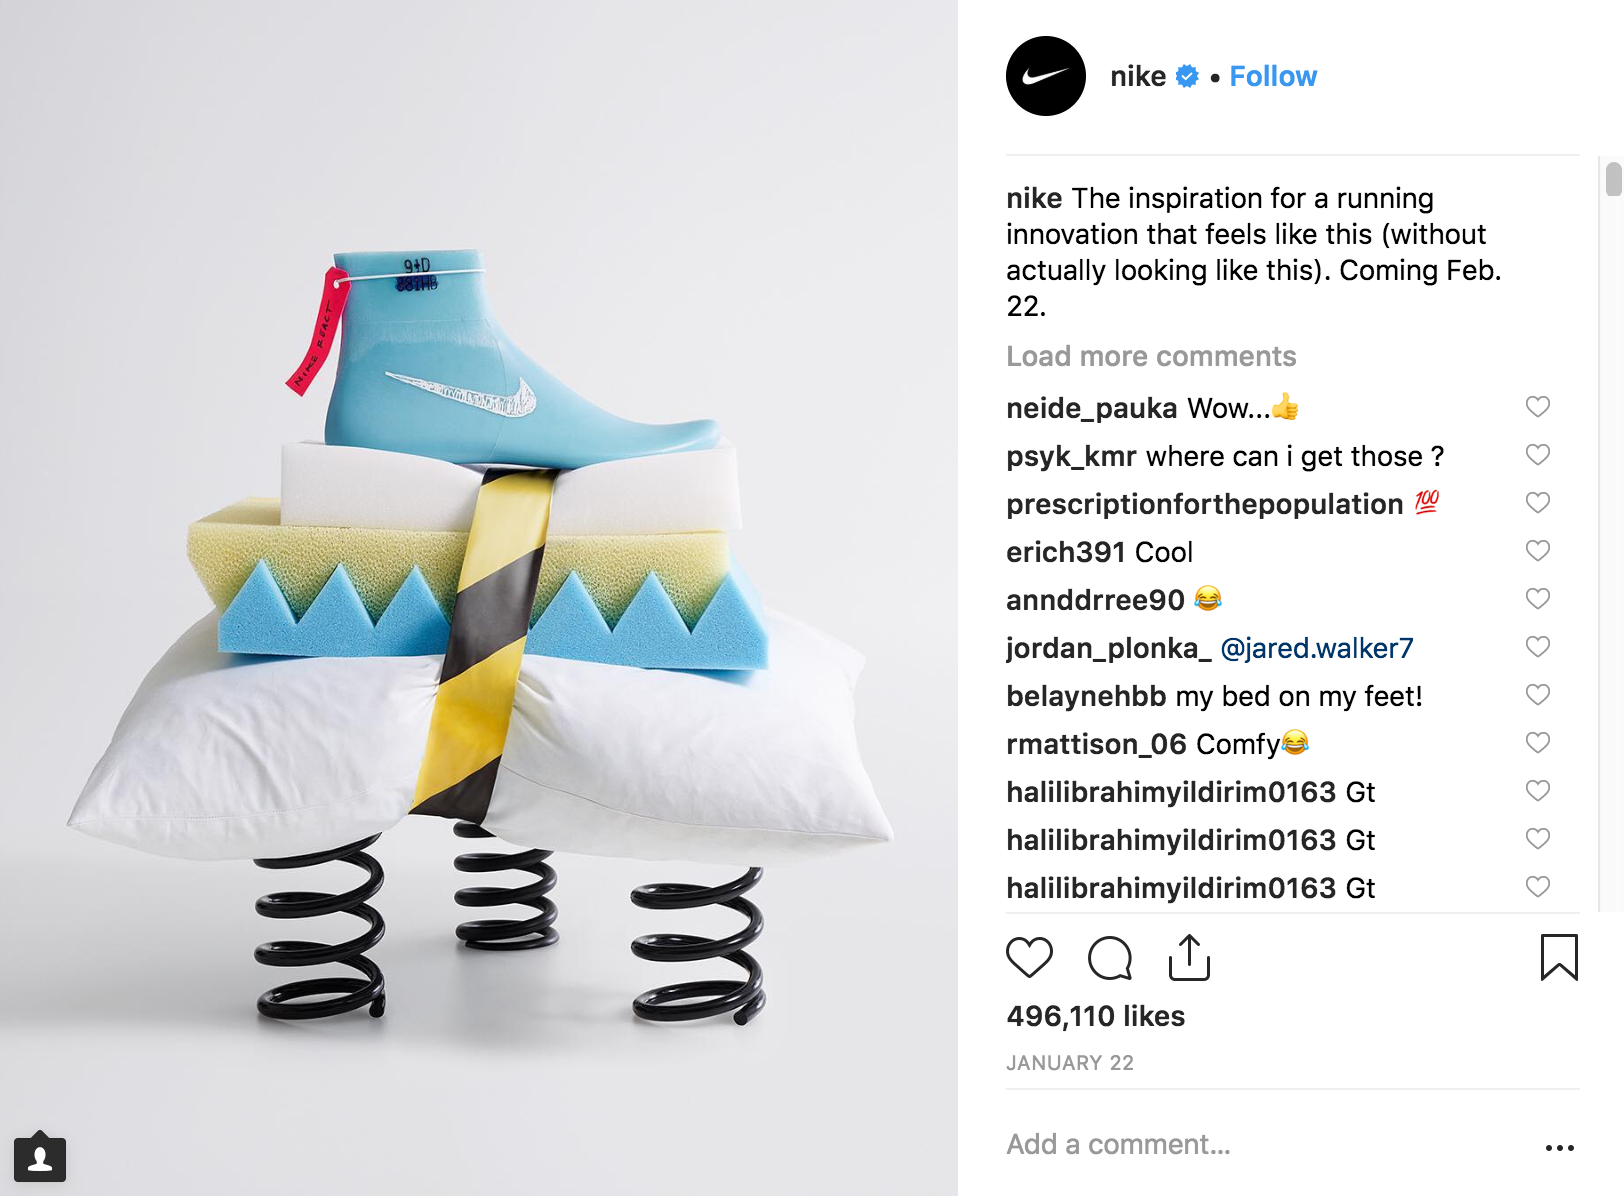 Best Instagram Campaigns 2018 - Sked Social | DeviceDaily.com